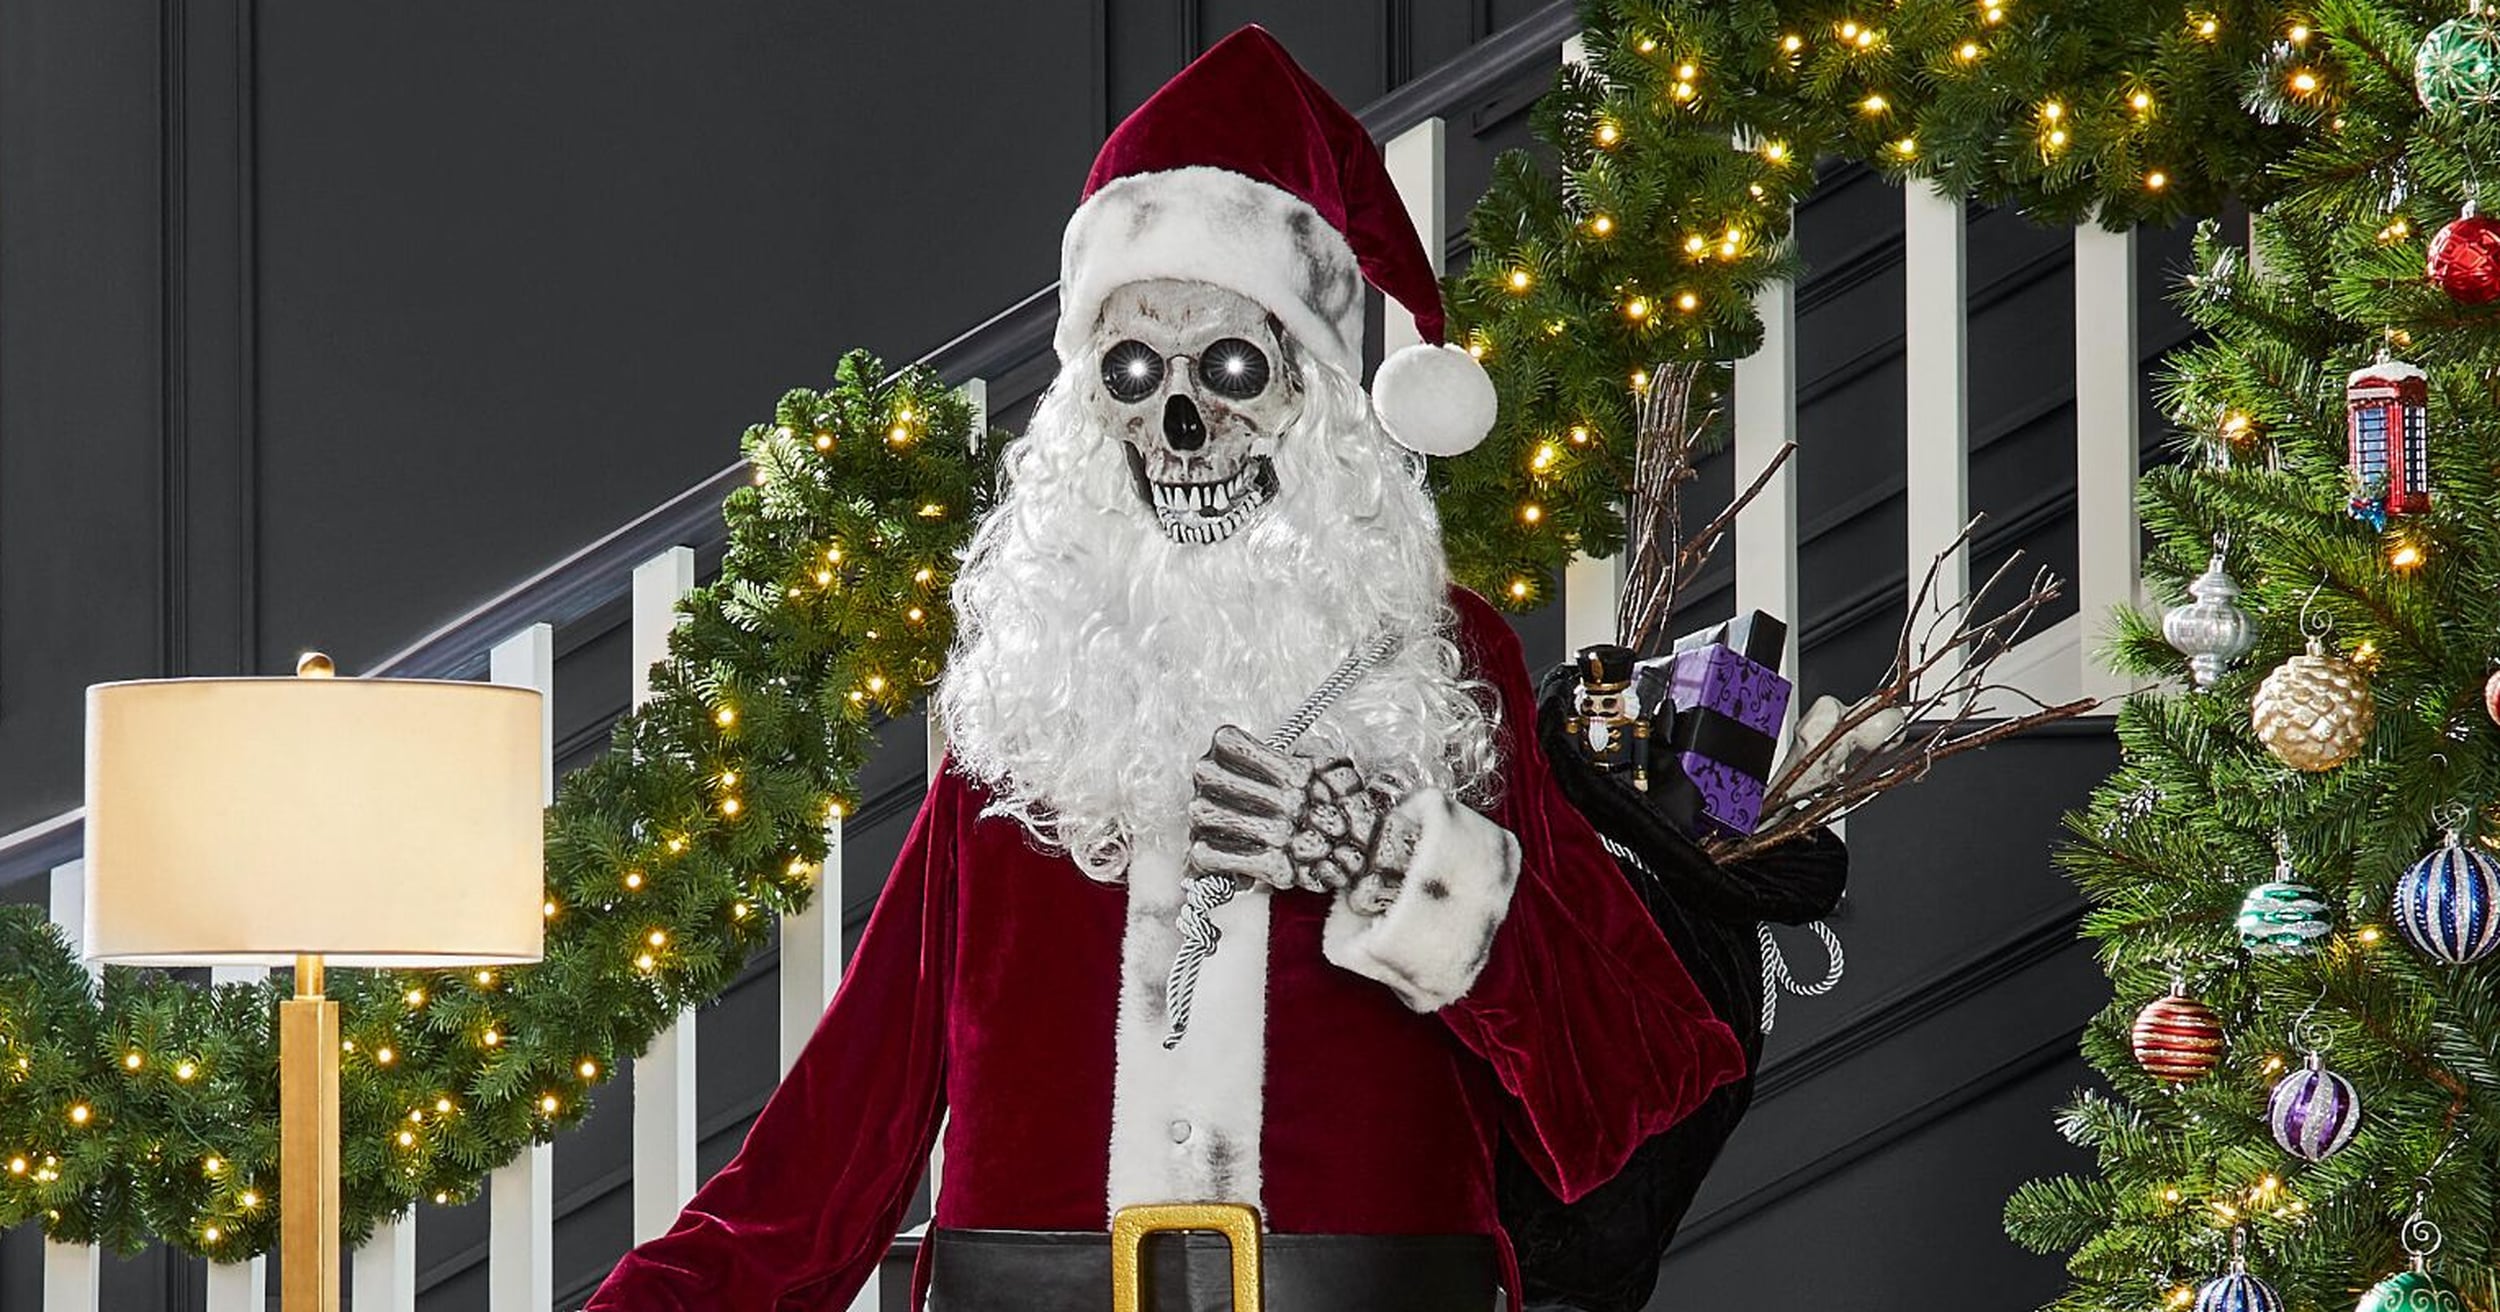 Home Depot’s Skeleton Santa Claus Is Proof Halloween and Christmas Can Coexist